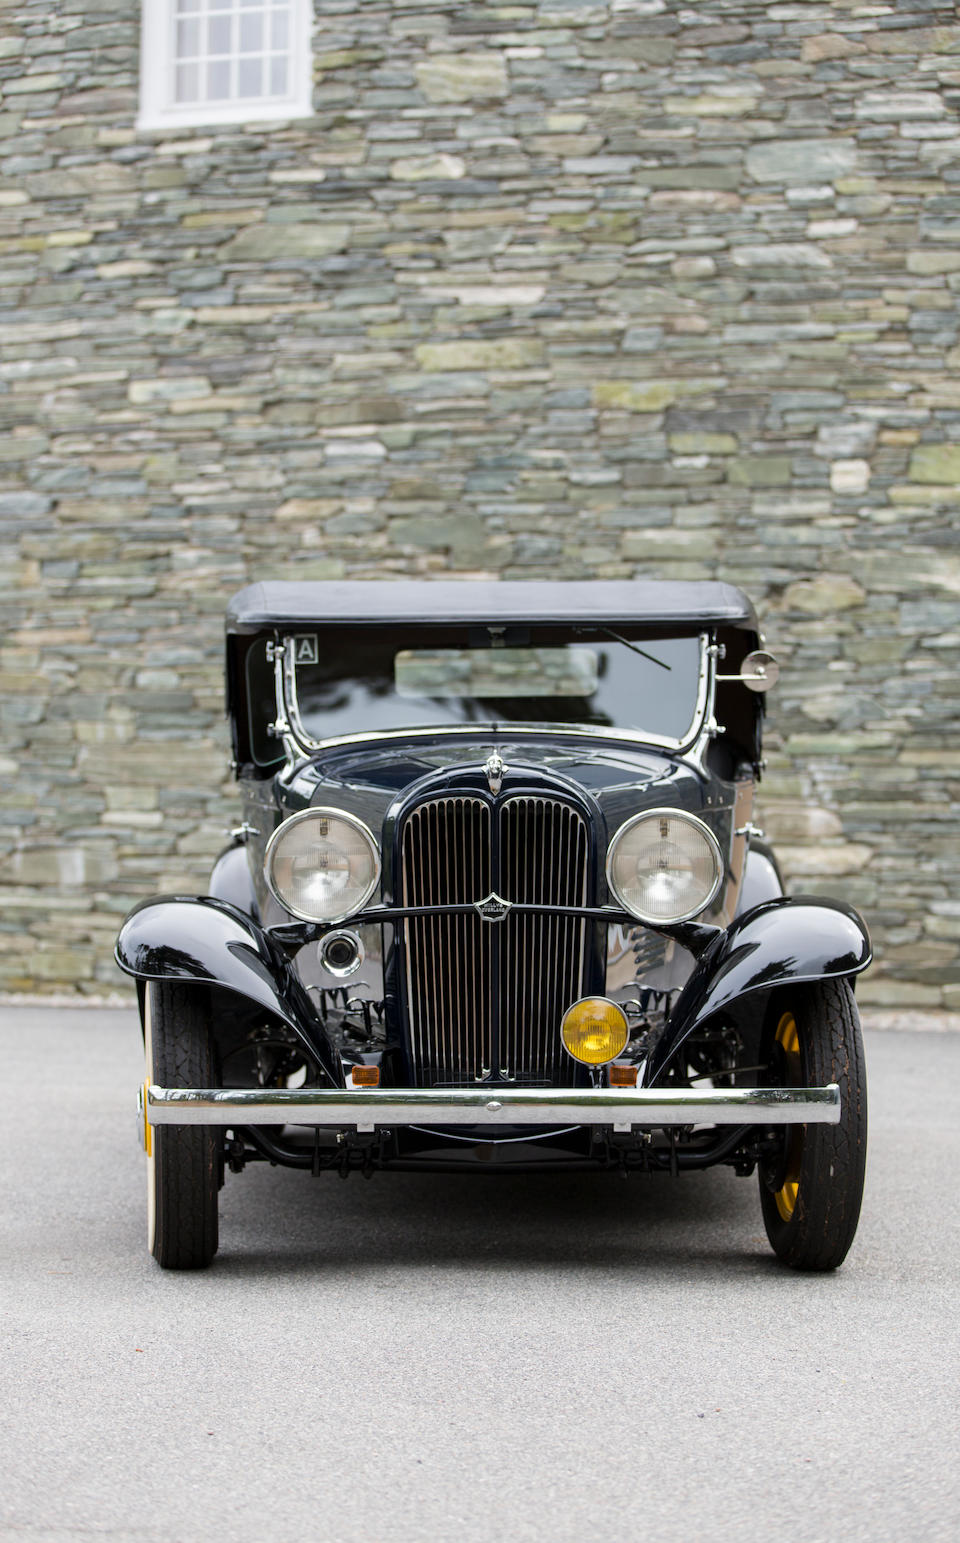 <i>Sold to benefit the Heritage Museums and Gardens</i><BR /><B>1932  Willys  6-90 Silver Streak Rumble Seat Roadster</B><BR />Chassis no. 8610<BR />Engine no. 8714